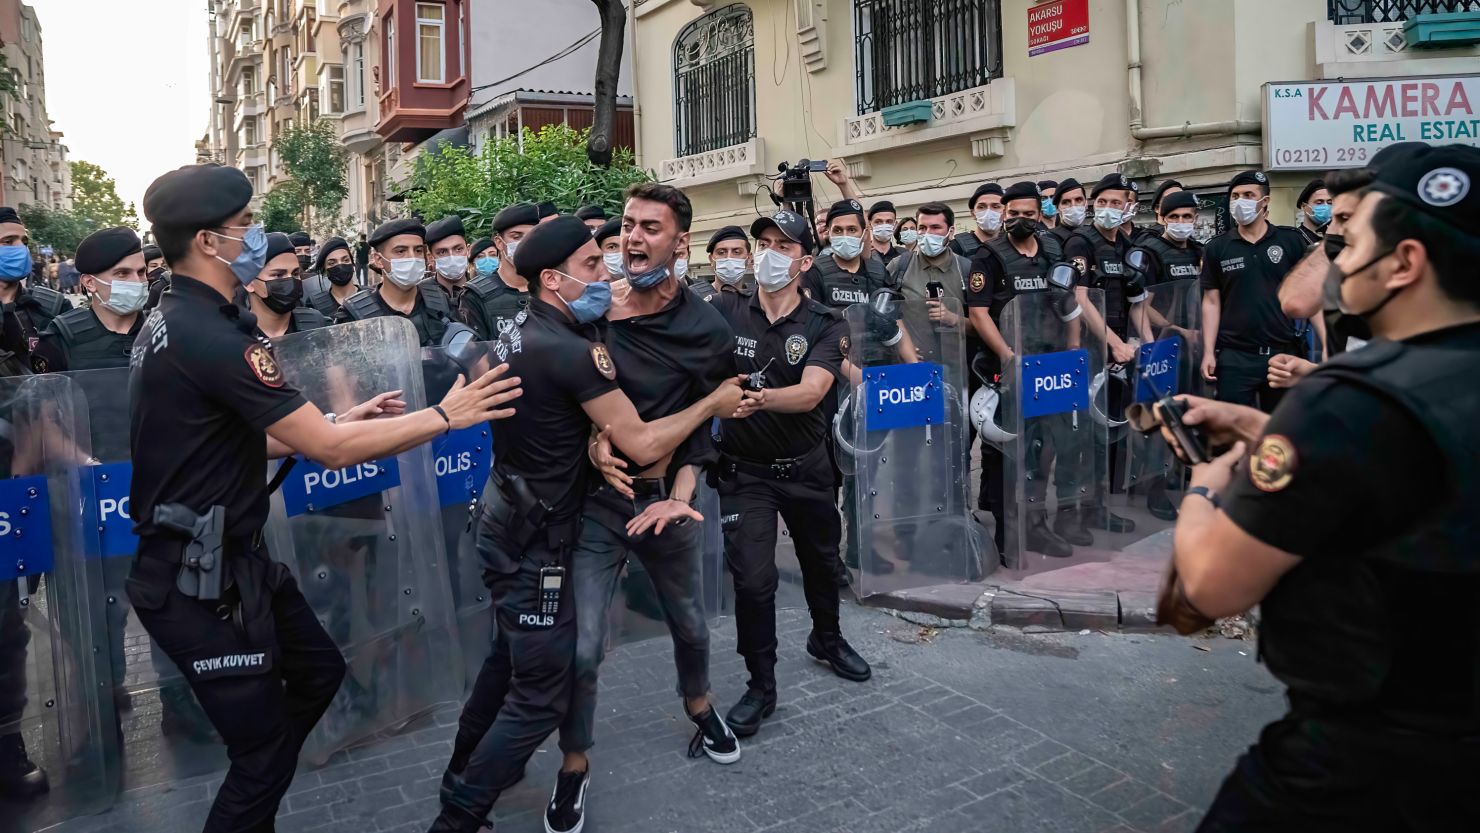 Istanbul Pride Parade Turkish Police Fire Tear Gas To Disperse Crowds Cnn 